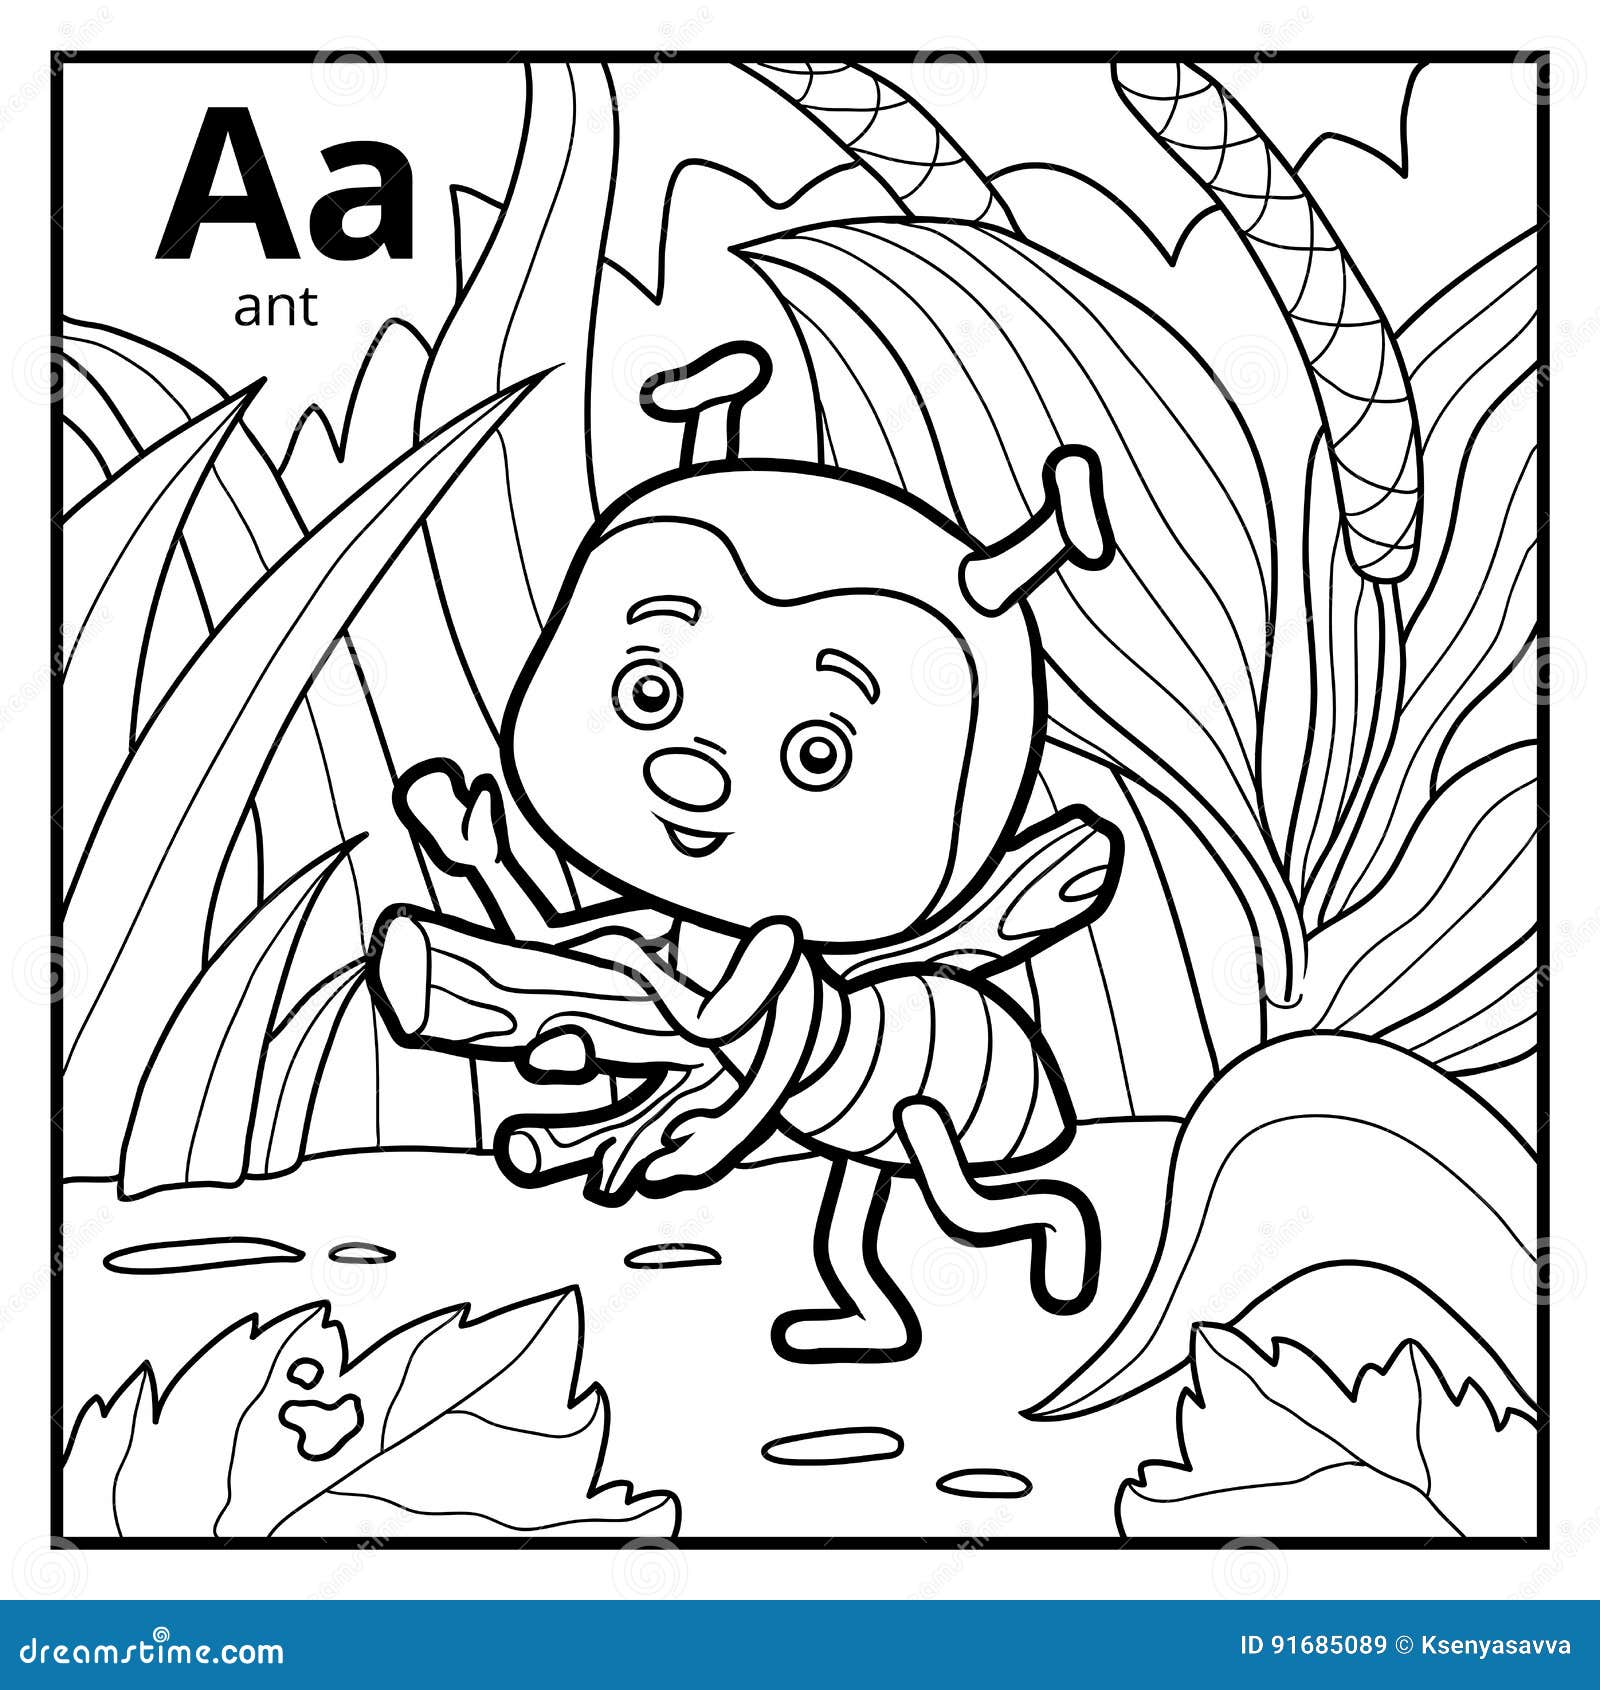 coloring book, colorless alphabet. letter a, ant